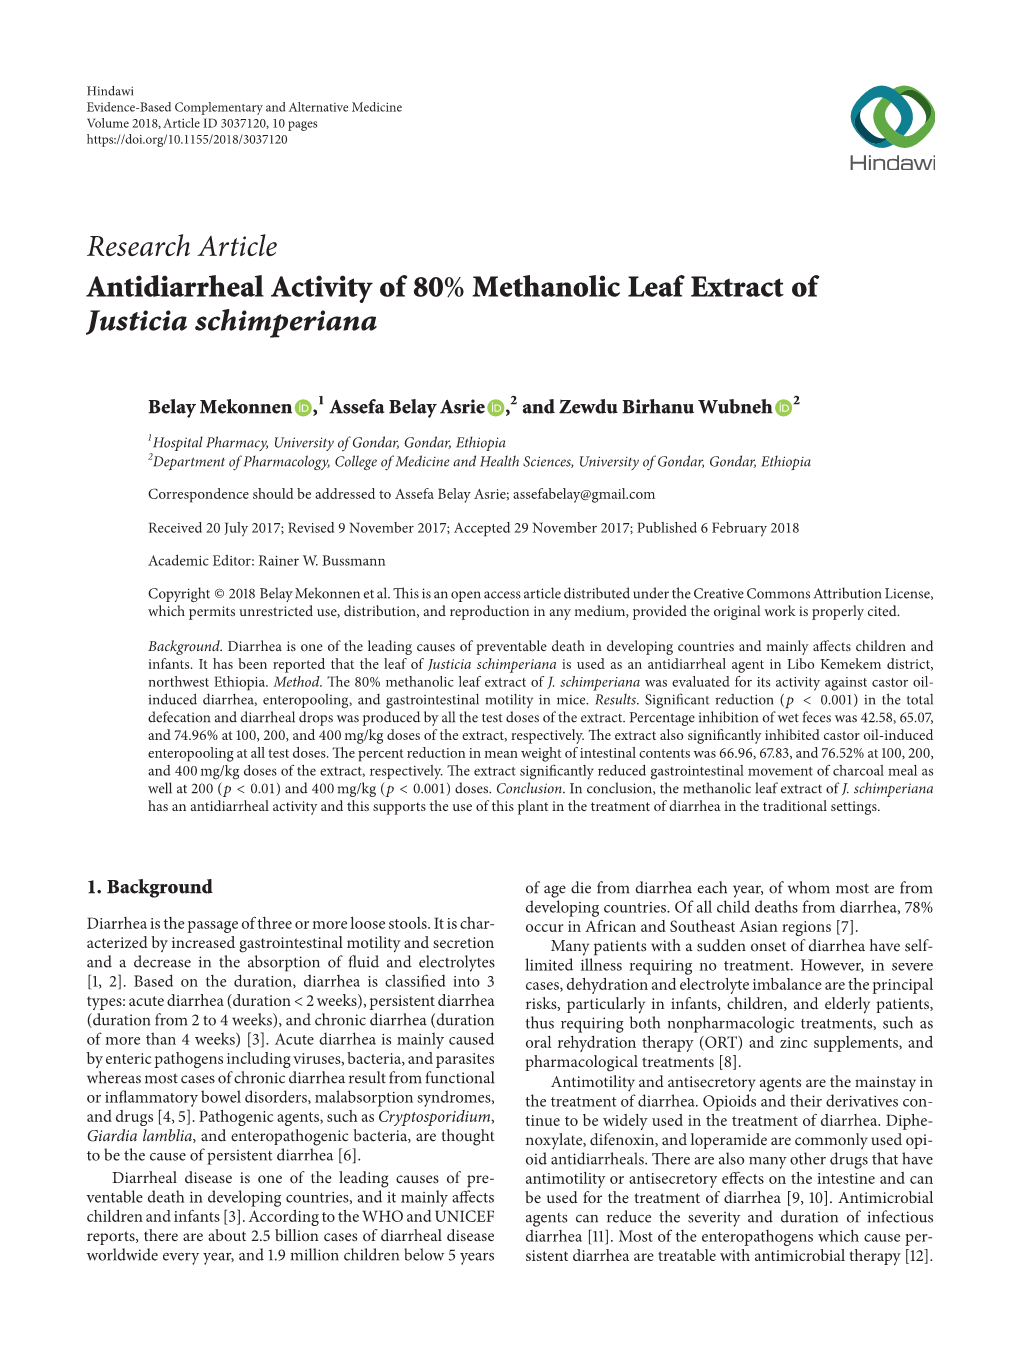 Research Article Antidiarrheal Activity of 80% Methanolic Leaf Extract of Justicia Schimperiana